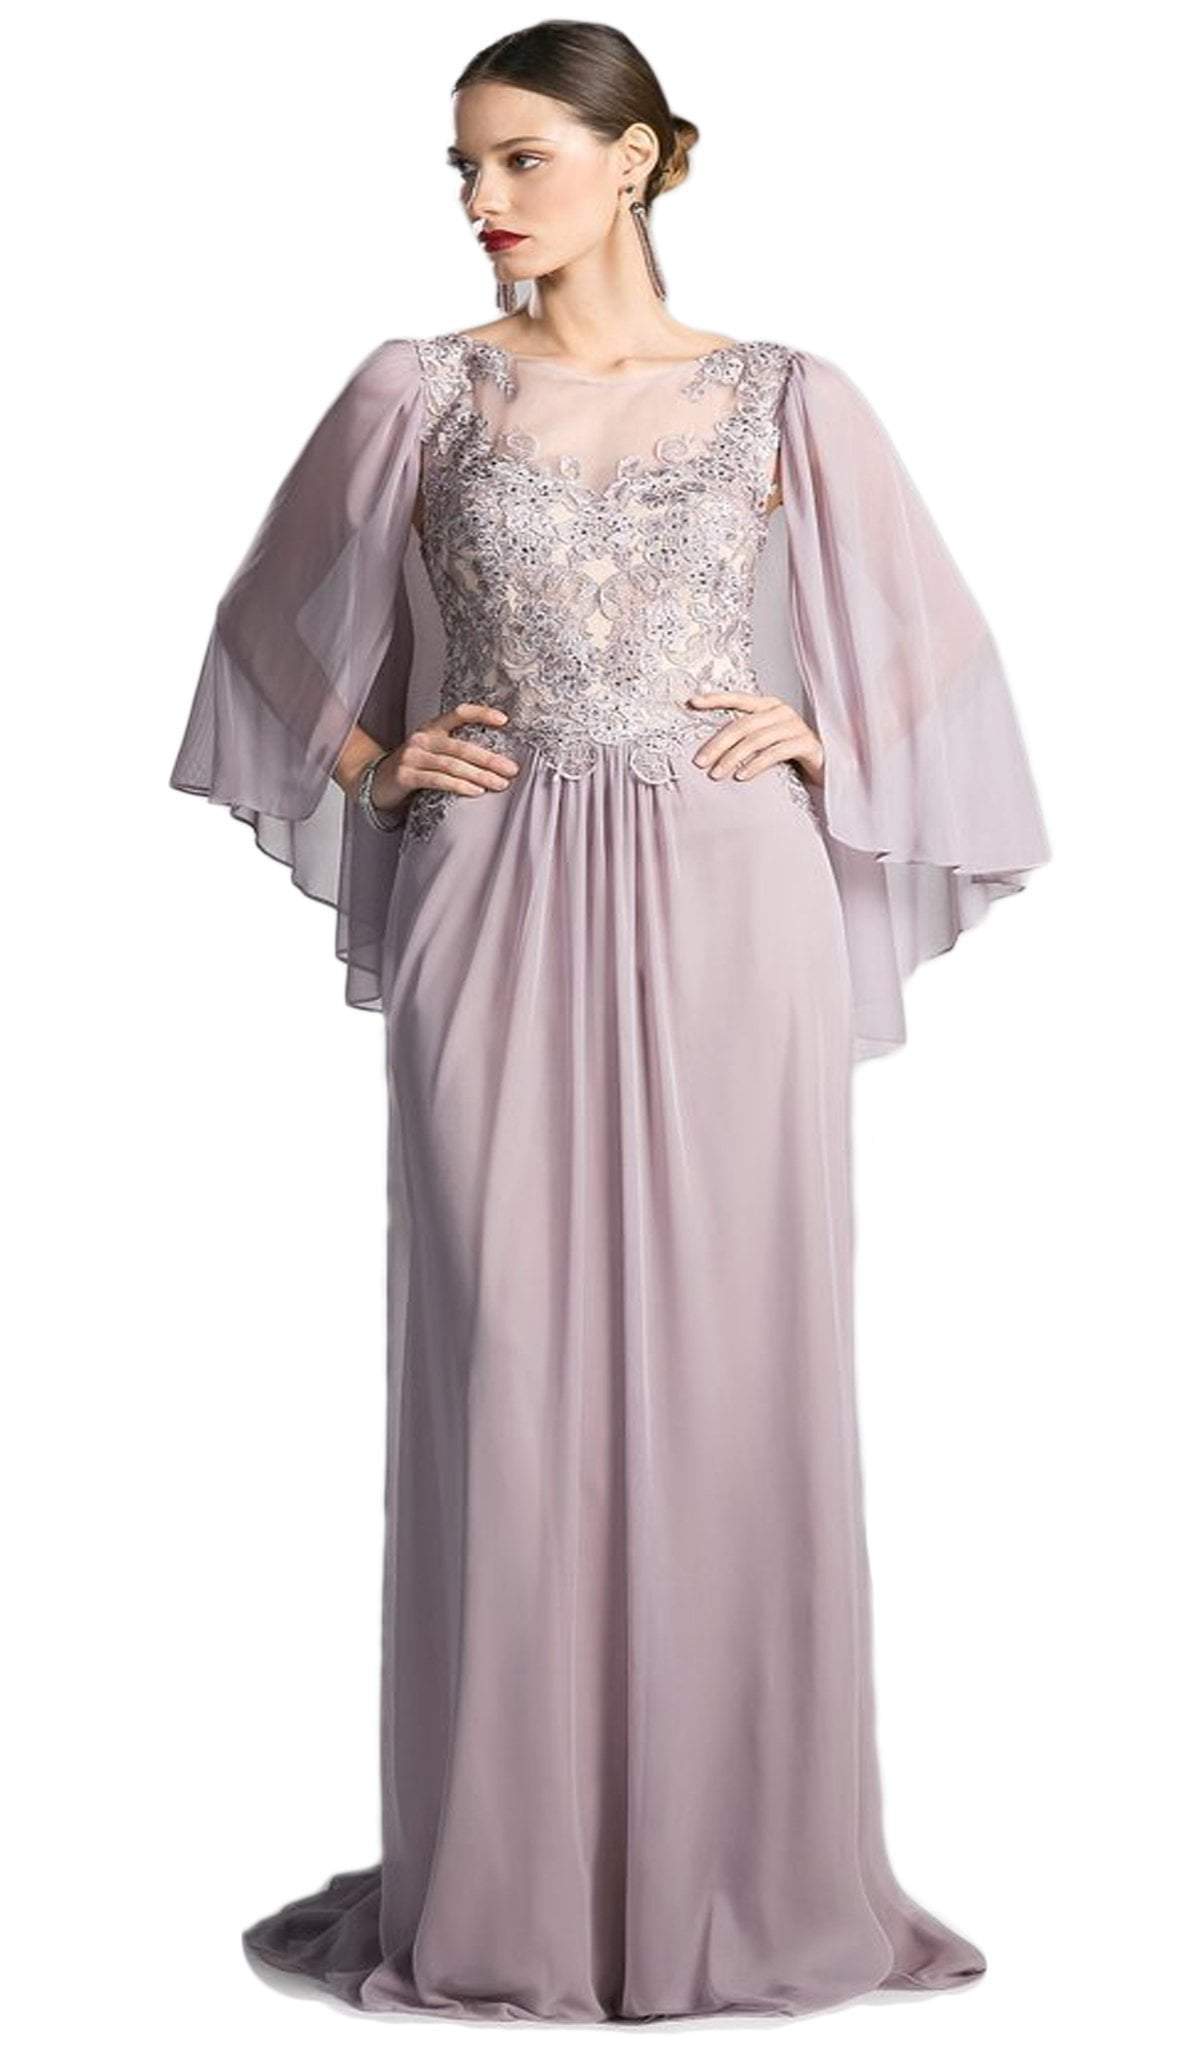 Cinderella Divine - Beaded Lace Sheath Dress With Sheer Cape Special Occasion Dress 2 / Mocha